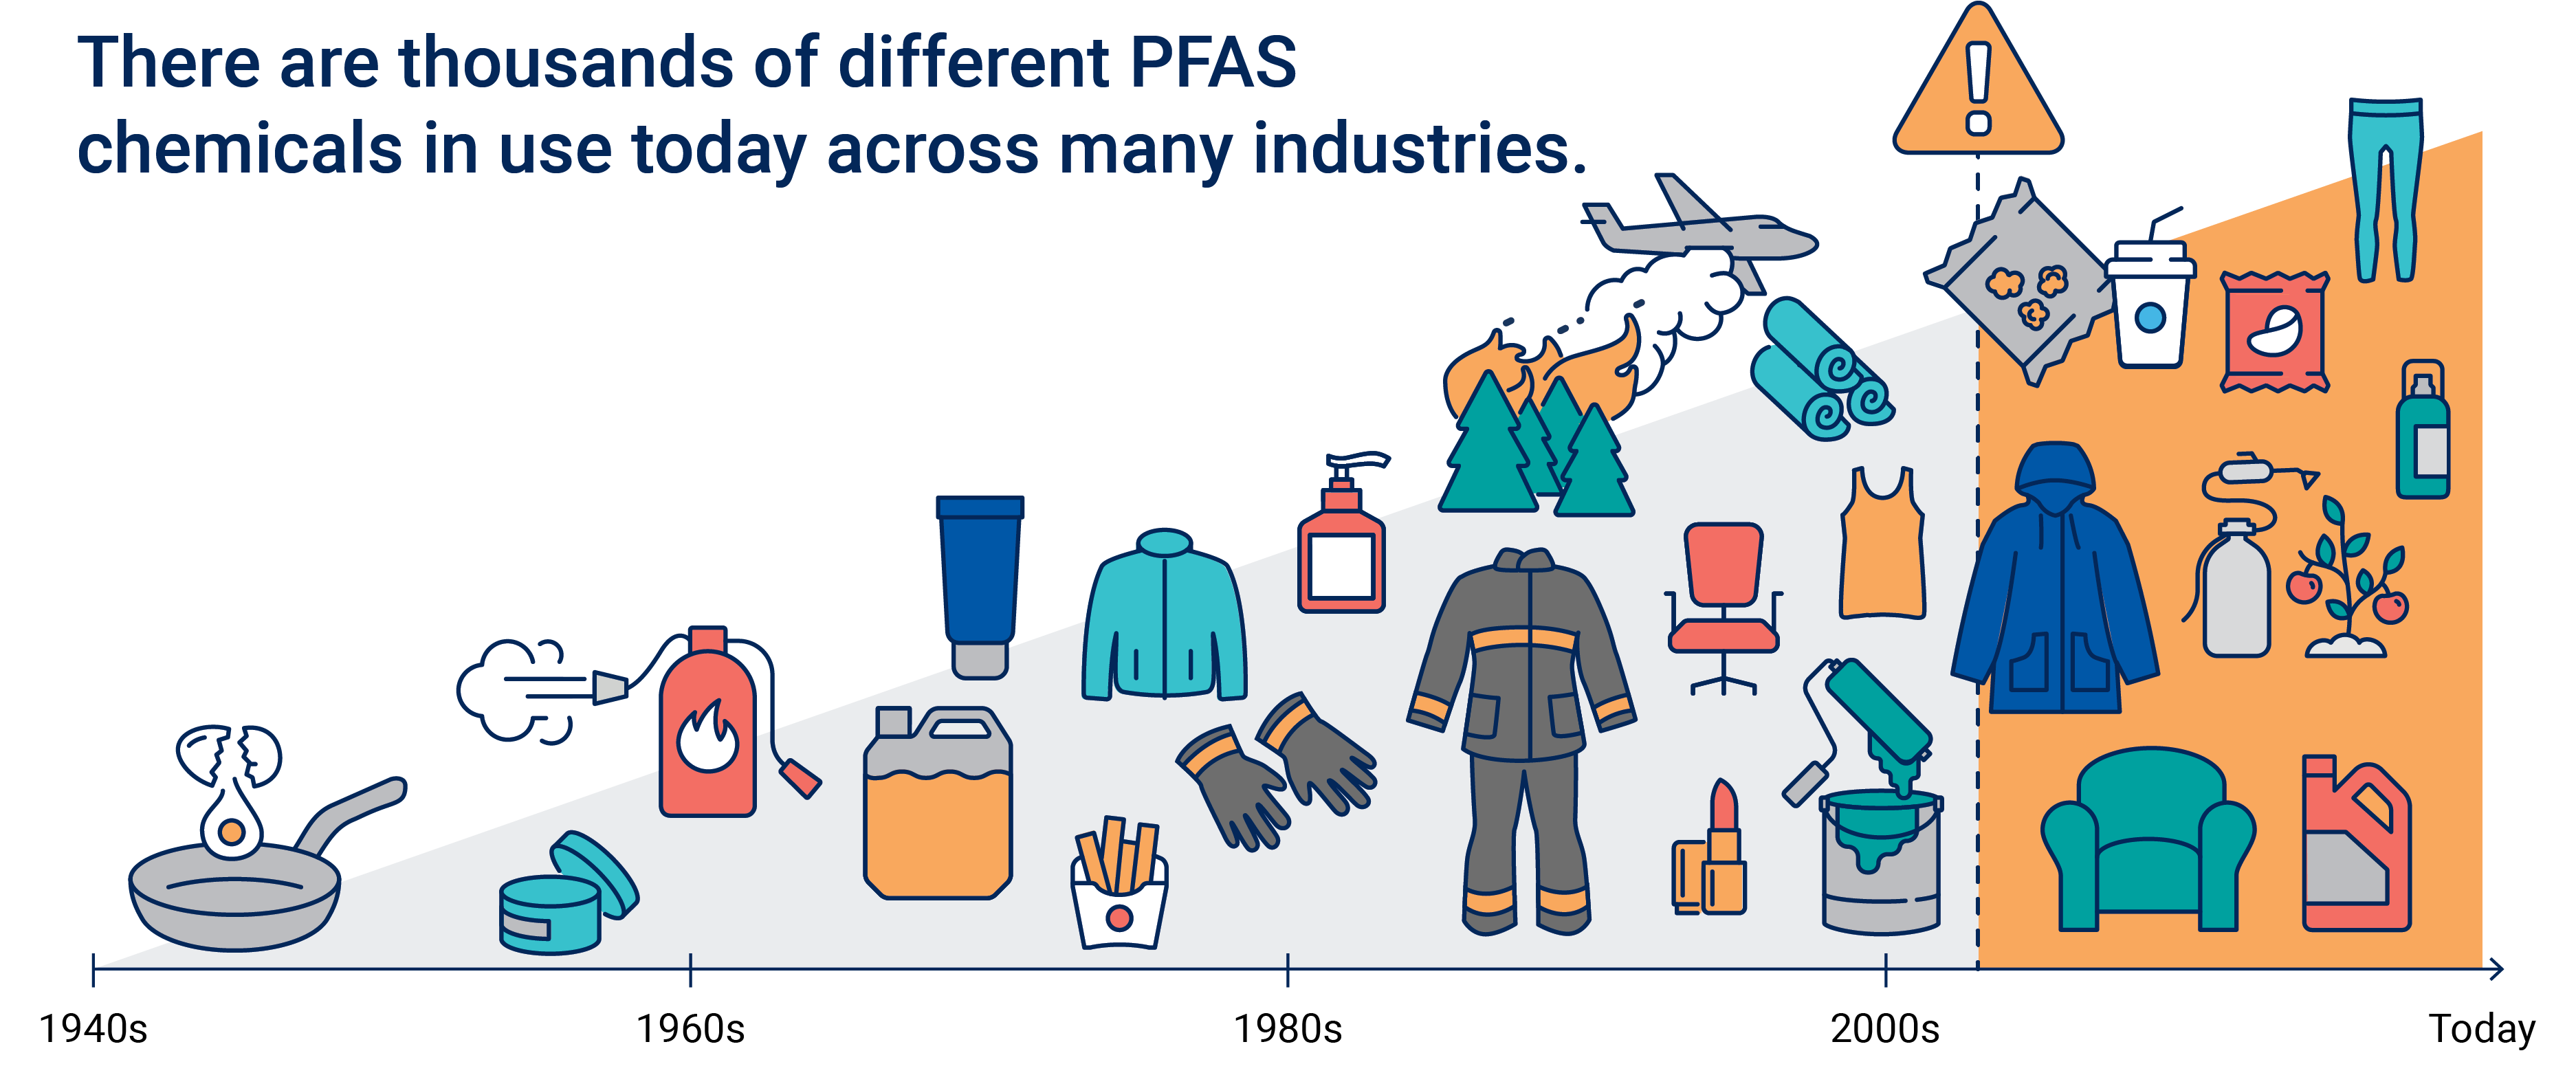 There are thousands of different PFAS chemicals in use today across many industries.